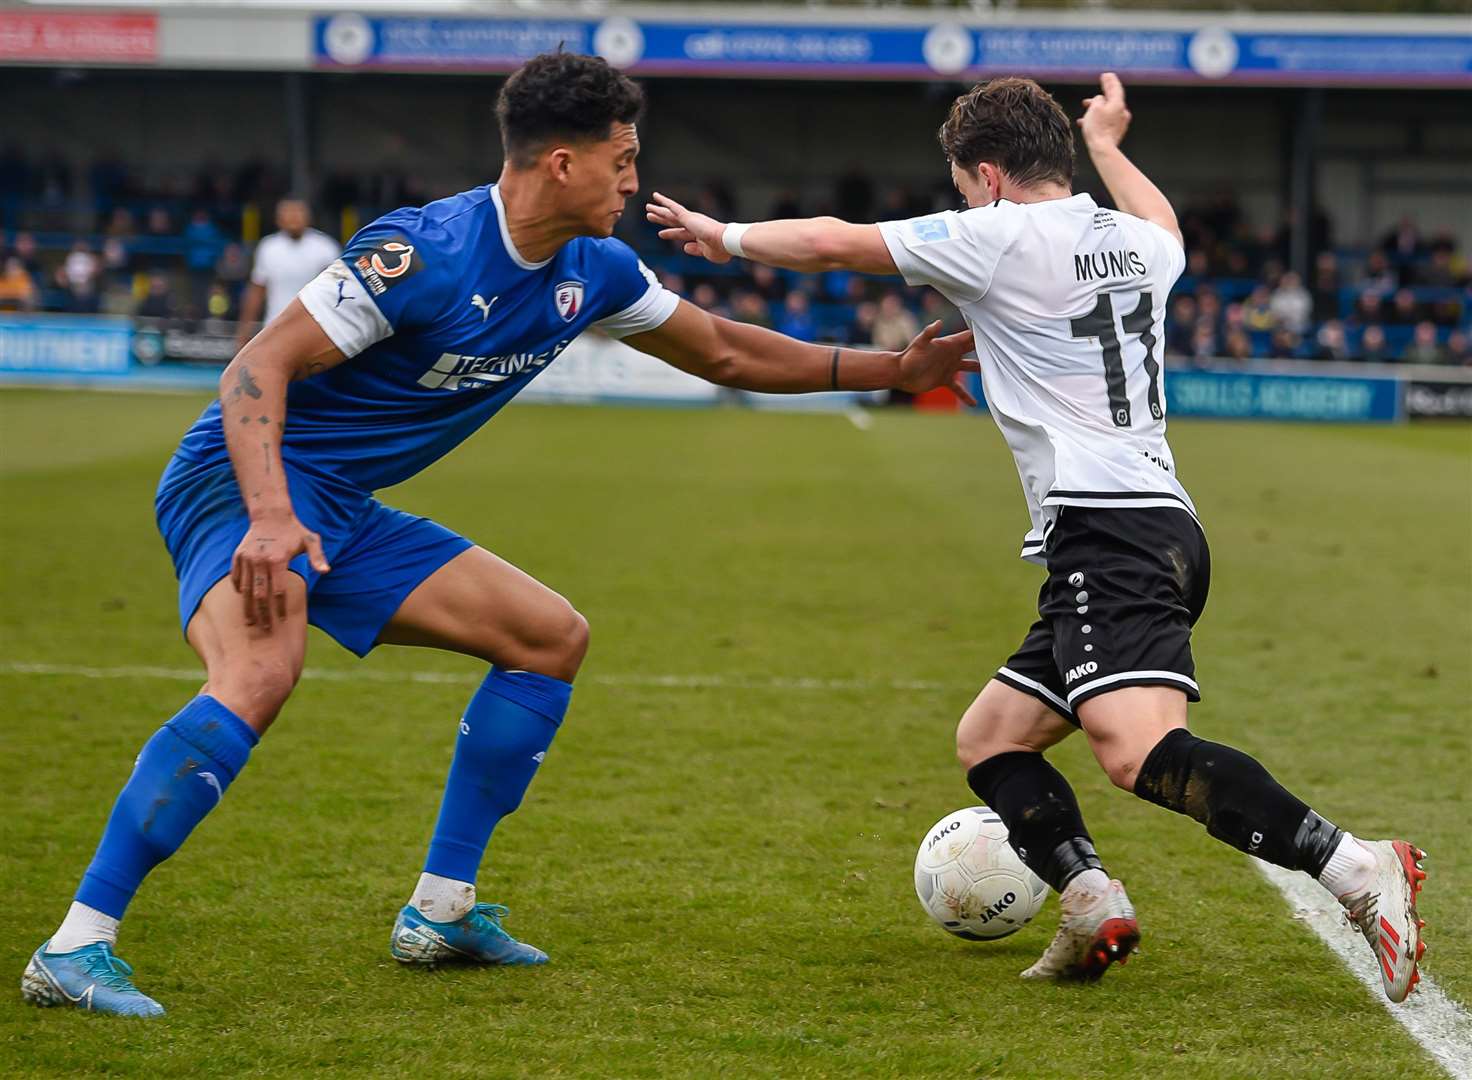 Dover's Jack Munns in action against Chesterfield last season. Picture: Alan Langley (43640029)